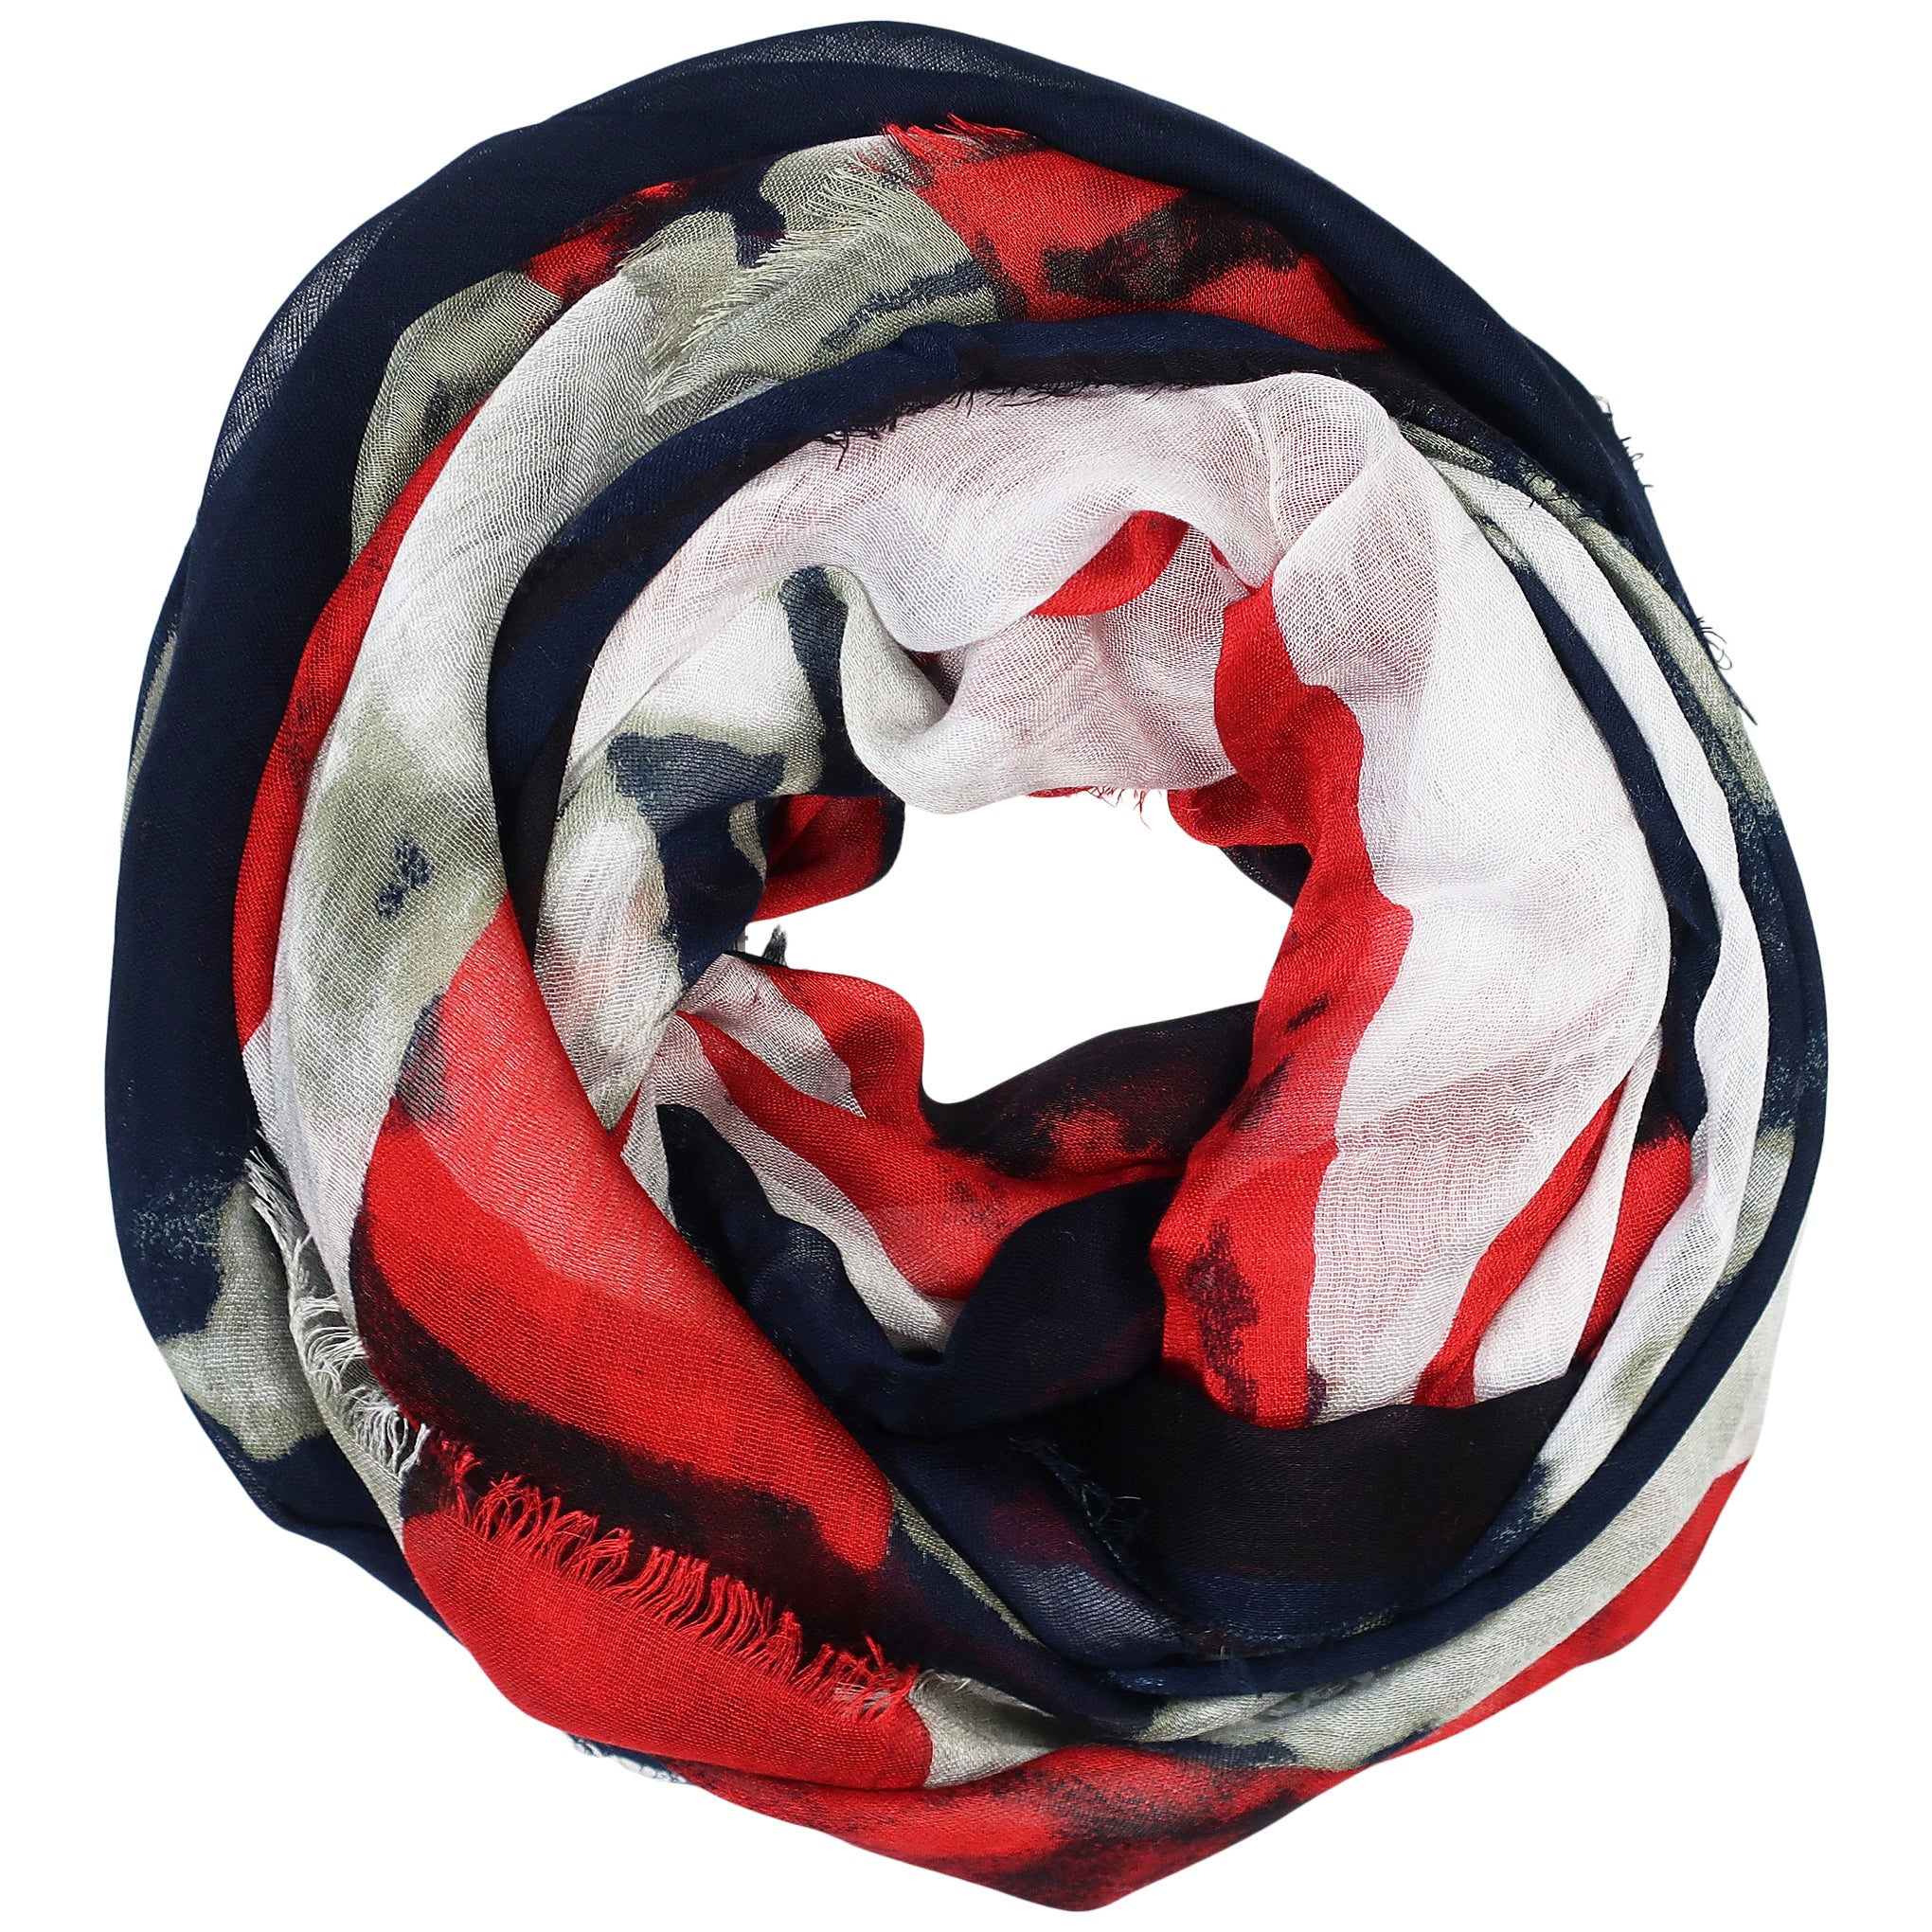 Blue Pacific American Girl Tapestry Cashmere and Silk Scarf in Red White Blue